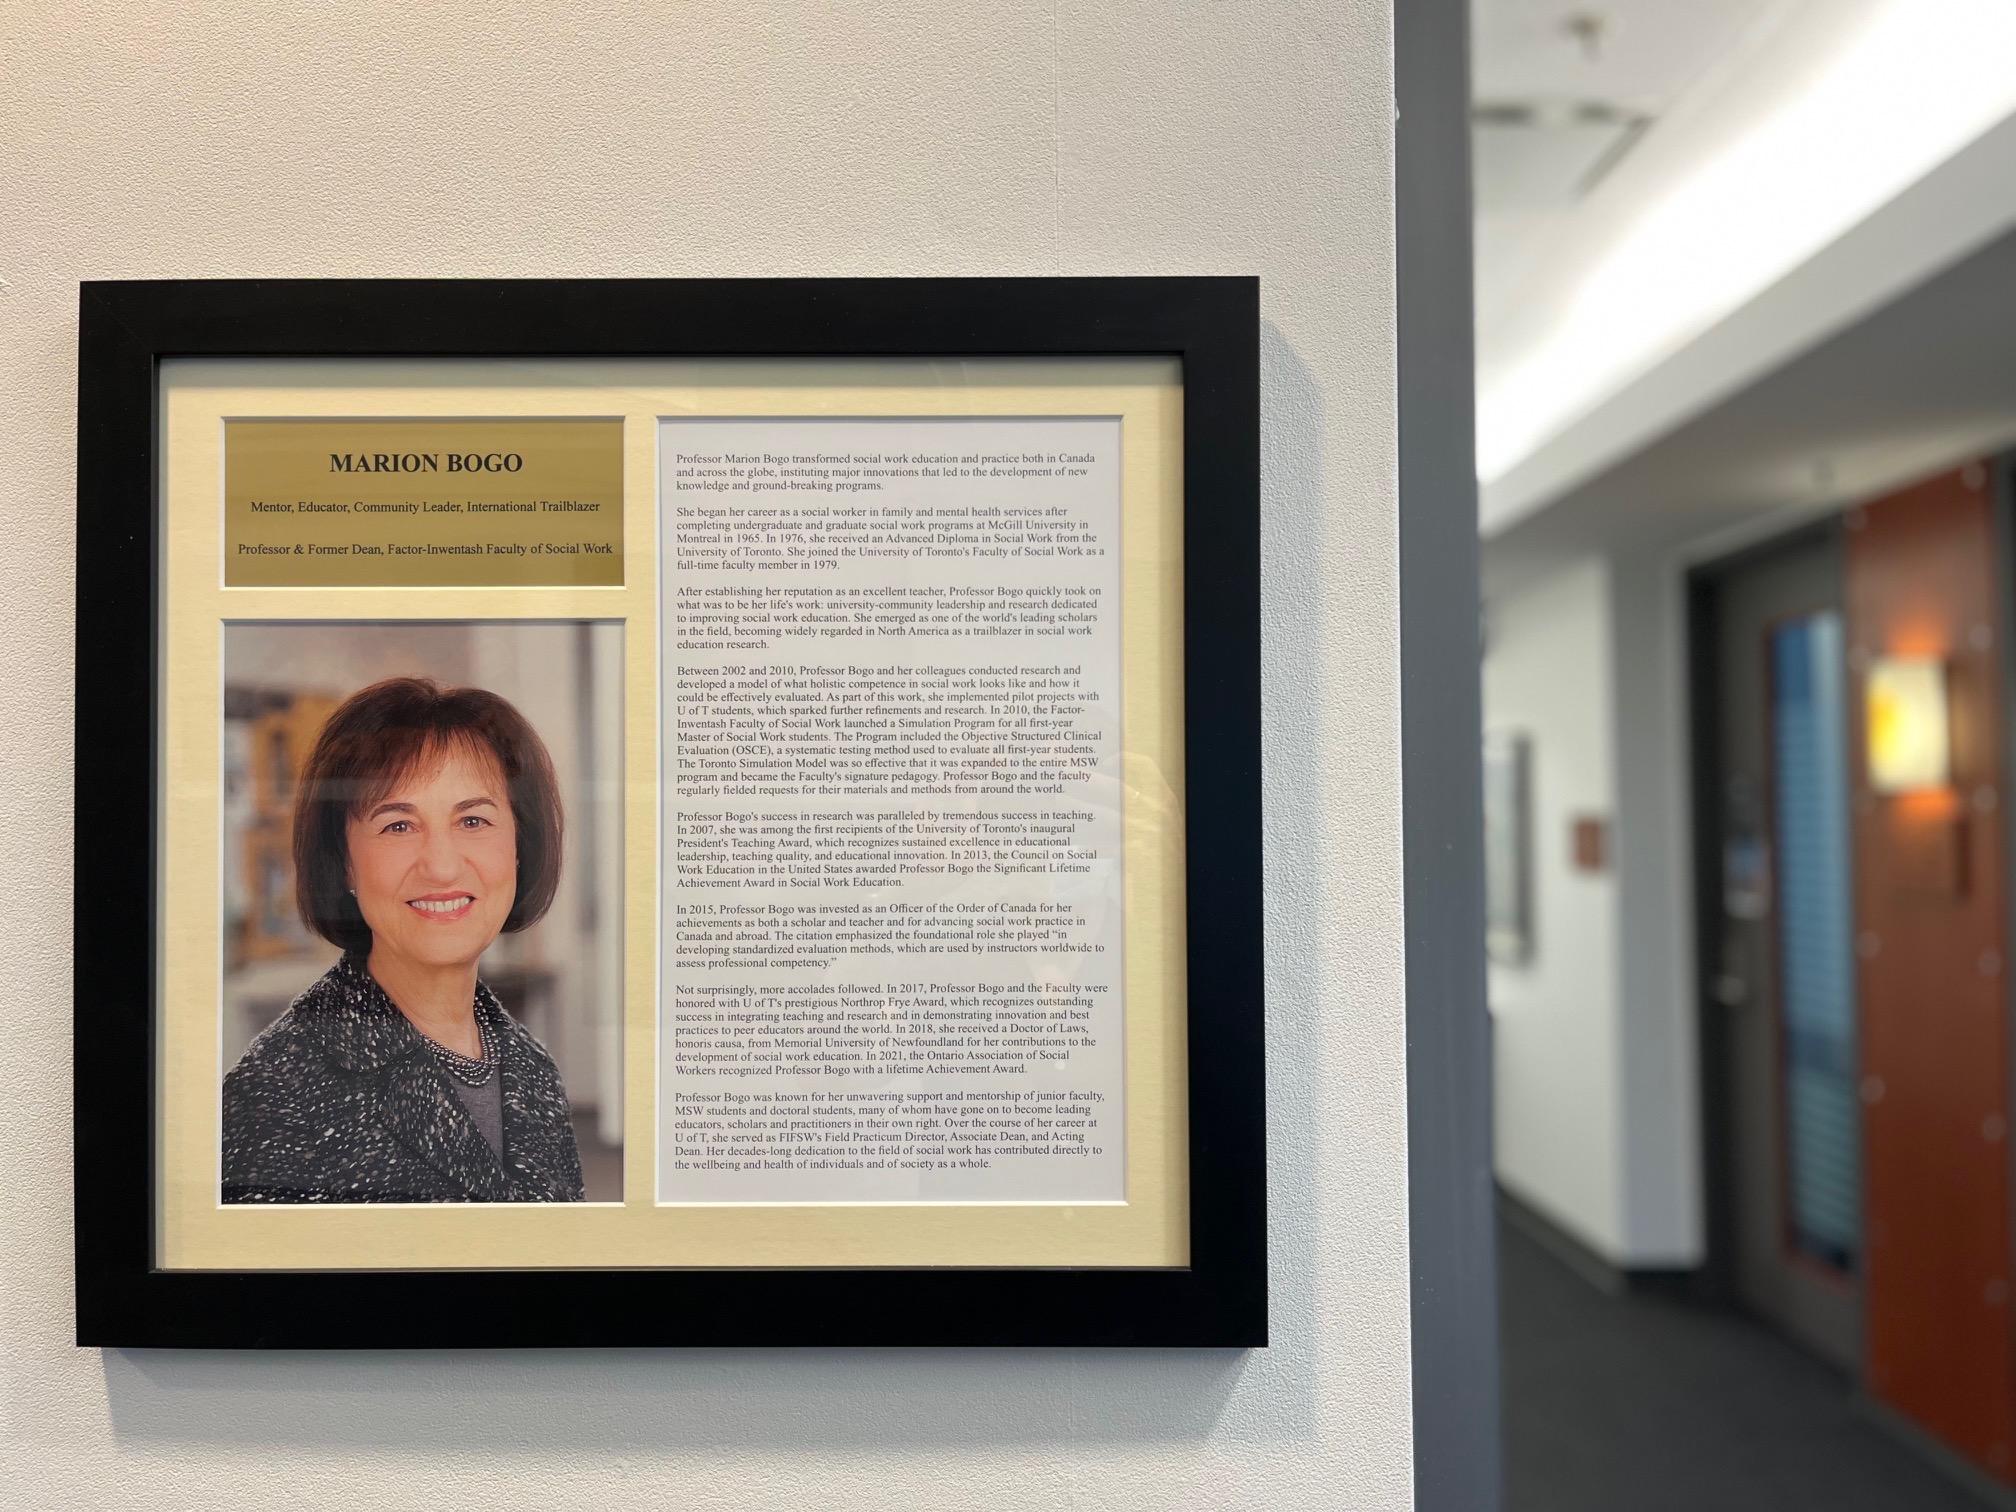 Photo of the plaque honouring Marion Bogo that hangs by the elevators on the third floor of FIFSW's building